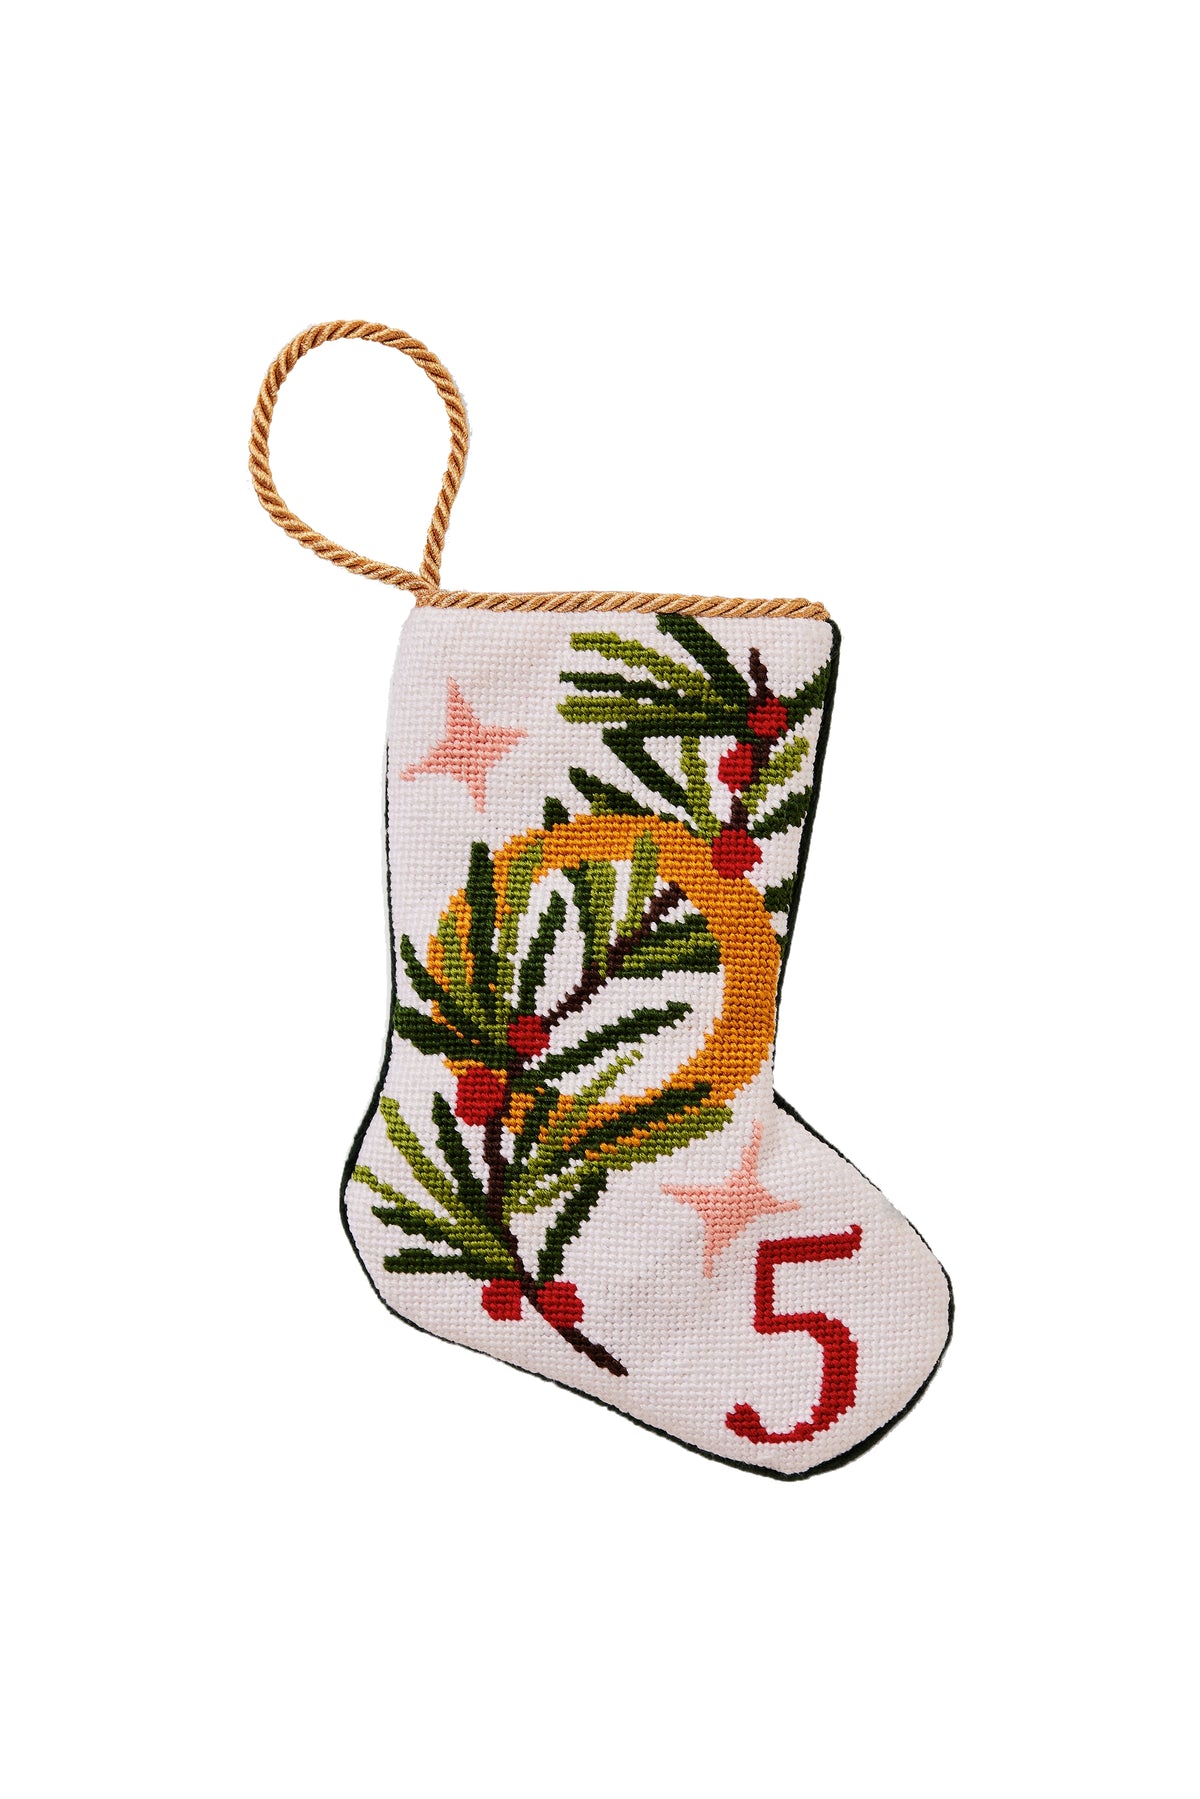 12 Days of Christmas Bauble Stocking, 5 Golden Rings